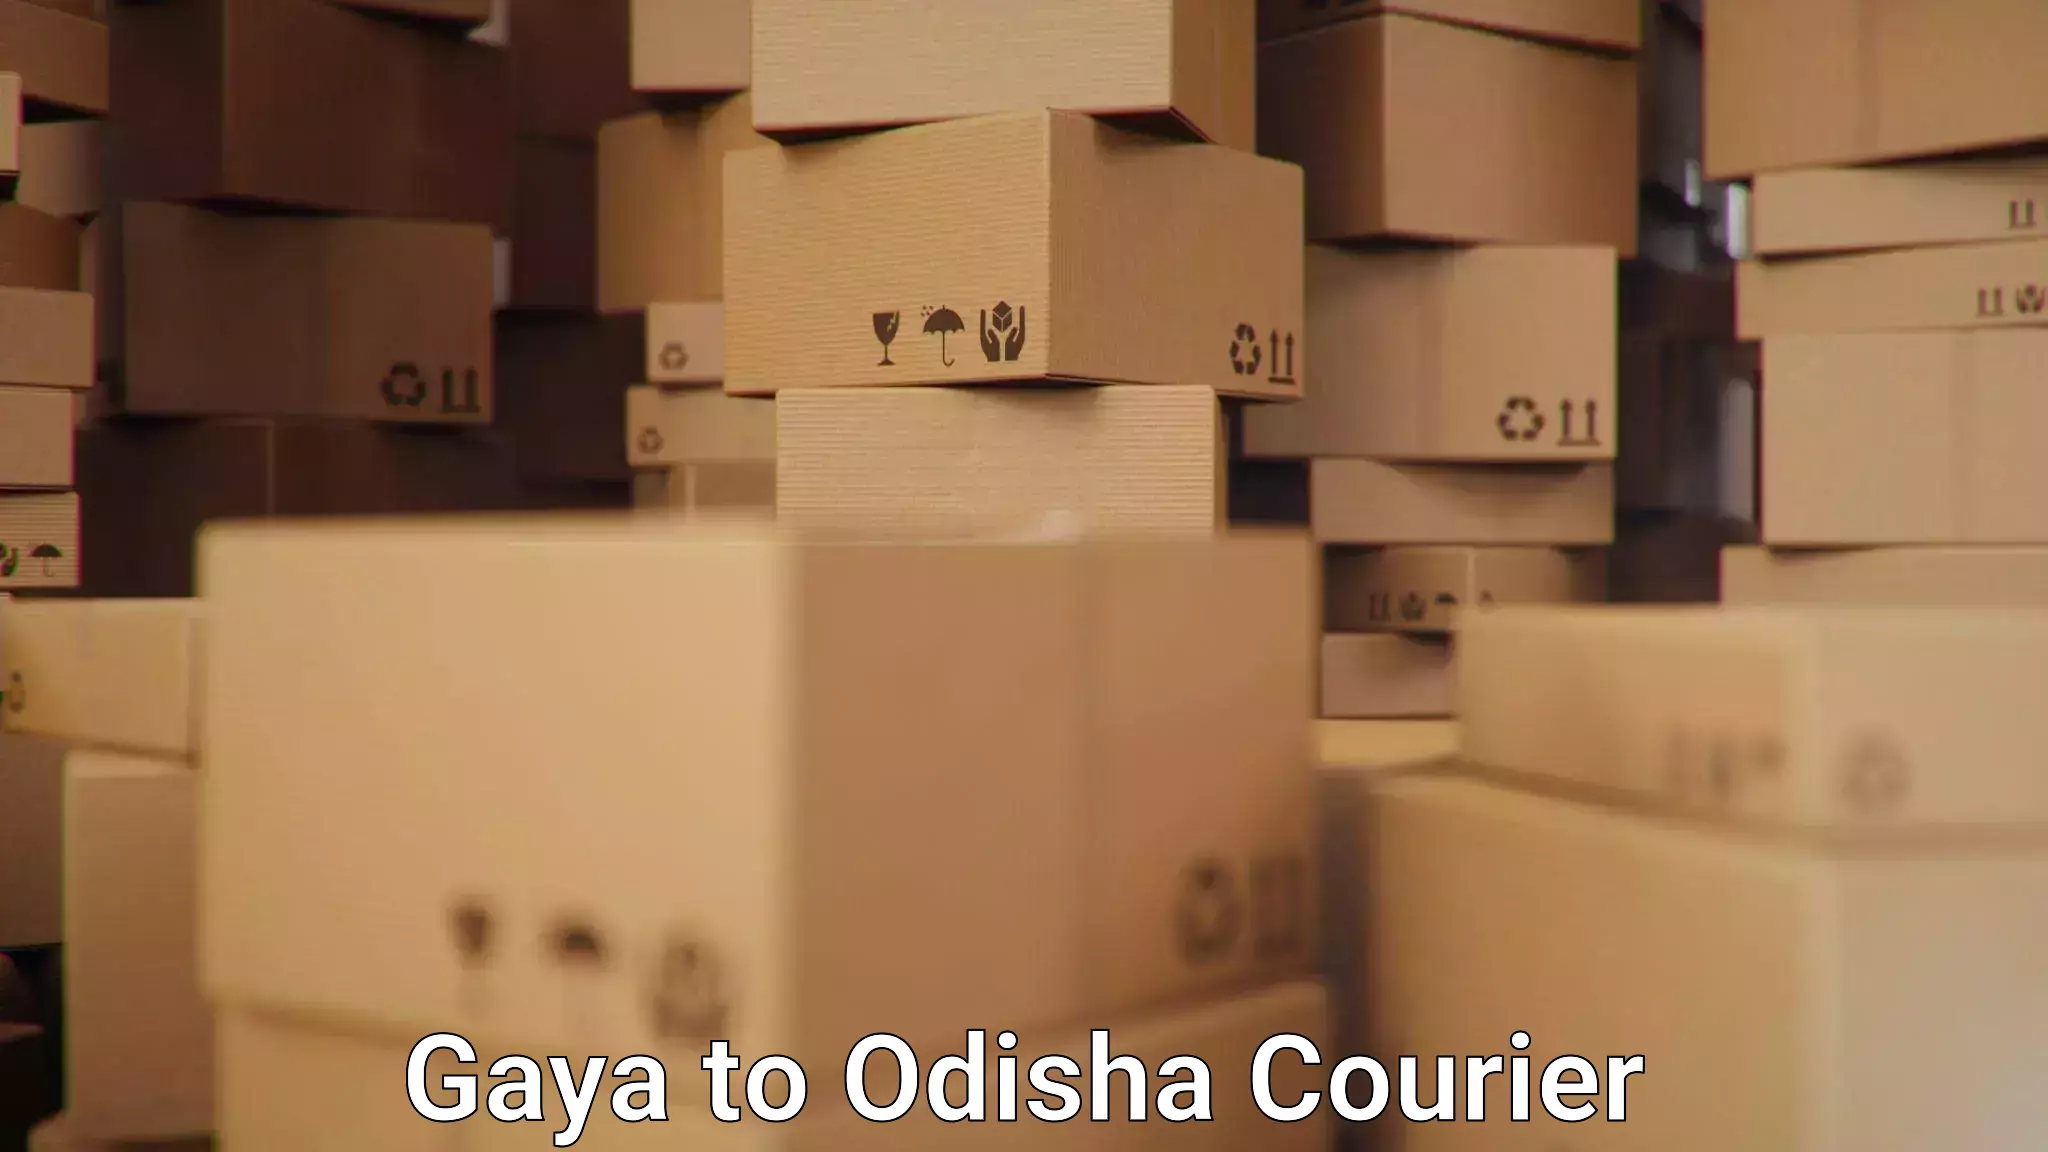 Courier service partnerships Gaya to Cuttack